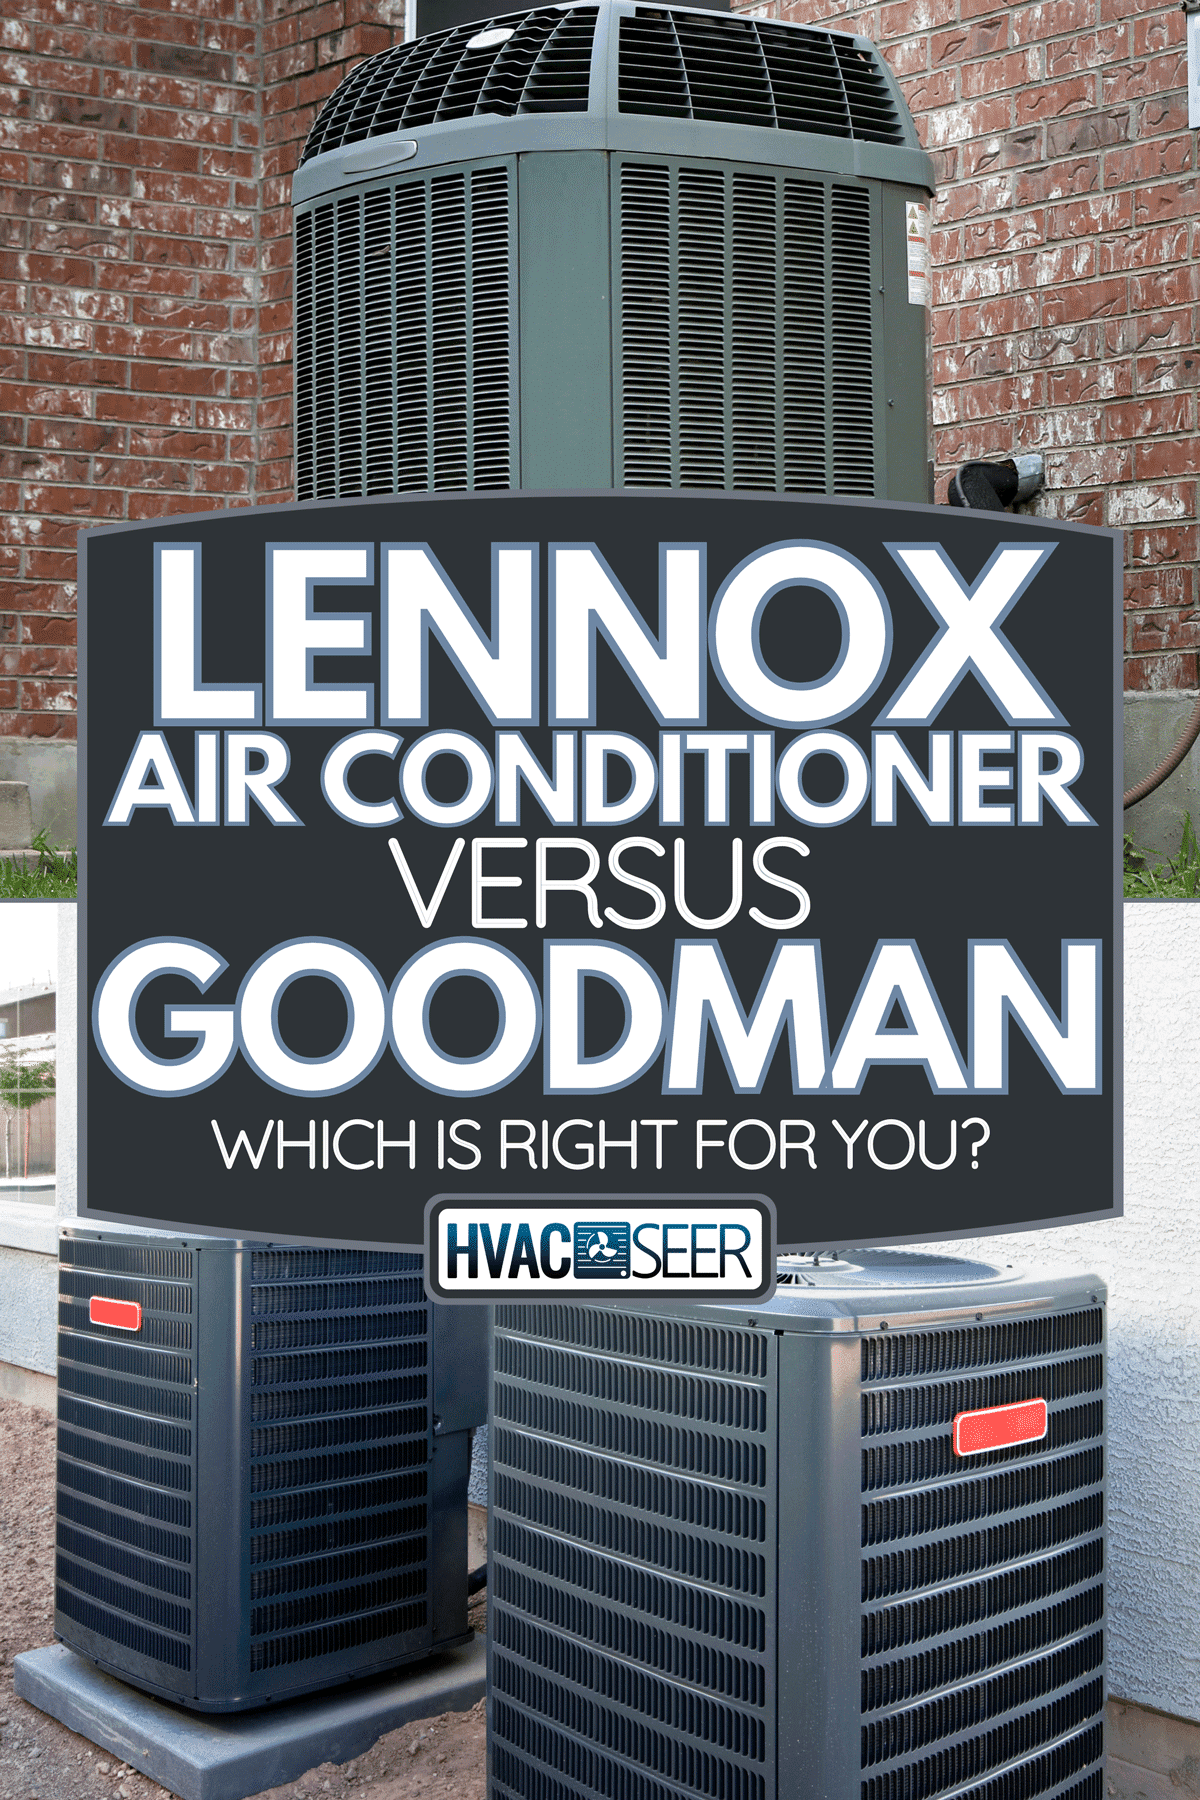 A comparison between Lennox and Goodman air conditioner, Lennox Air Conditioner Vs Goodman: Which Is Right For You?